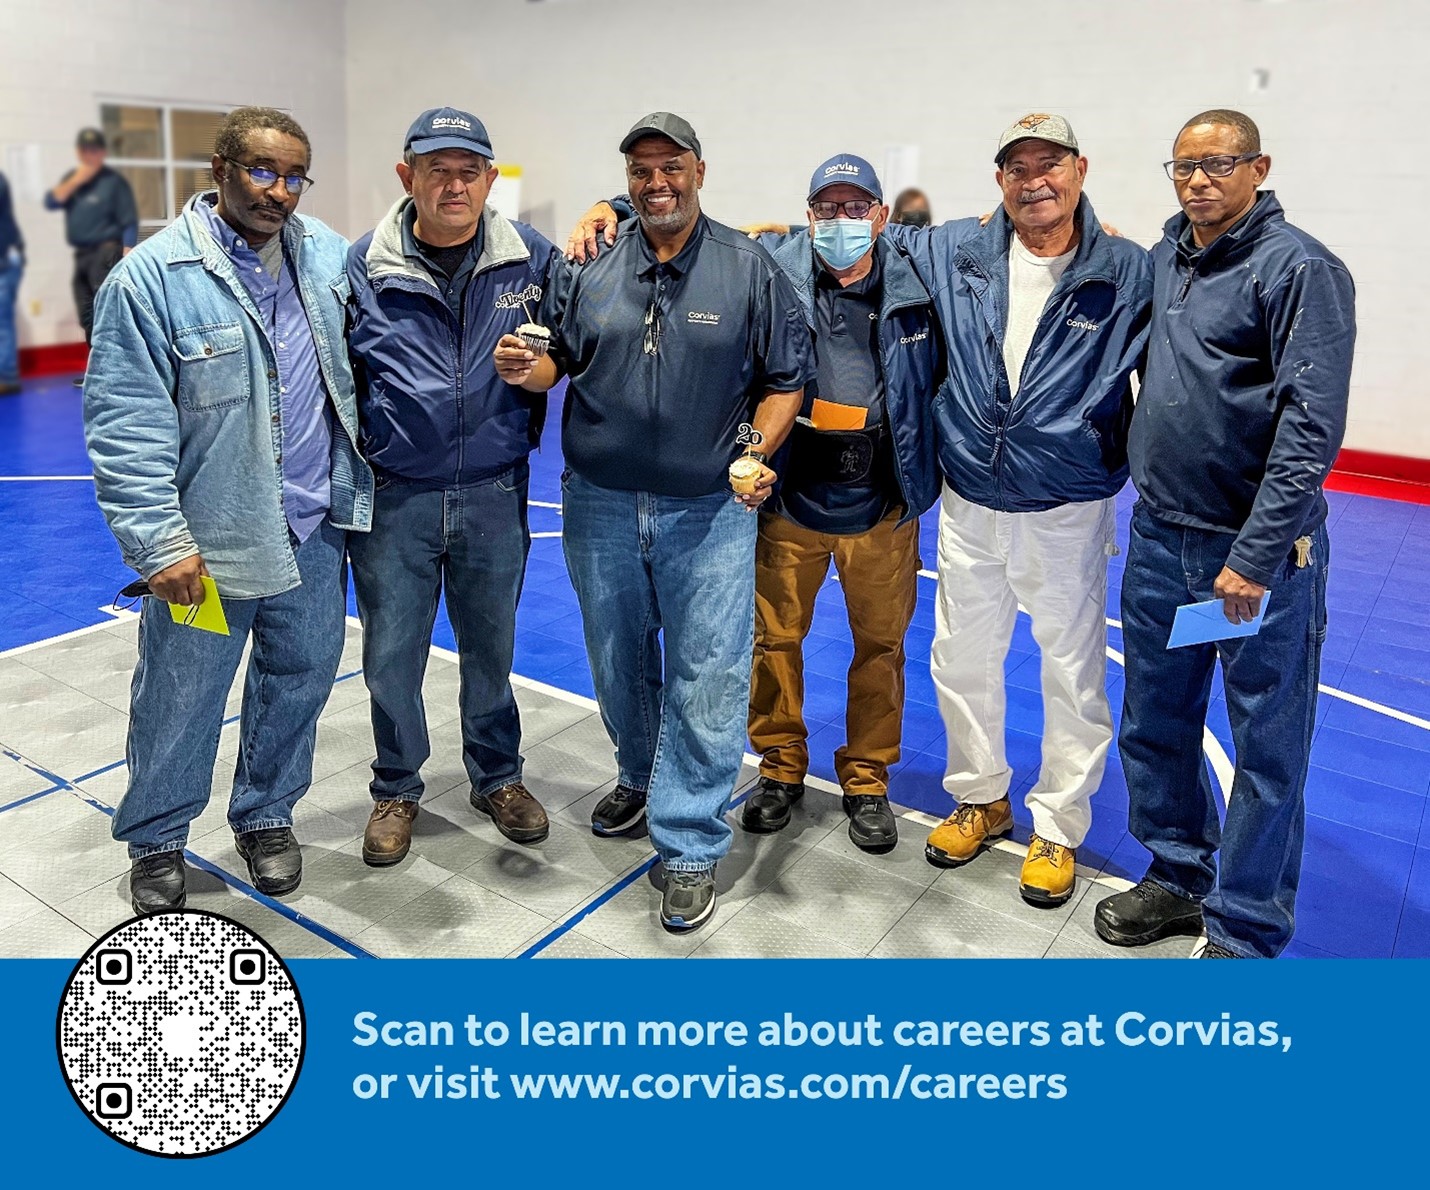 CORVIAS CELEBRATES EMPLOYEES’ LONG-STANDING SERVICE TO FORT MEADE